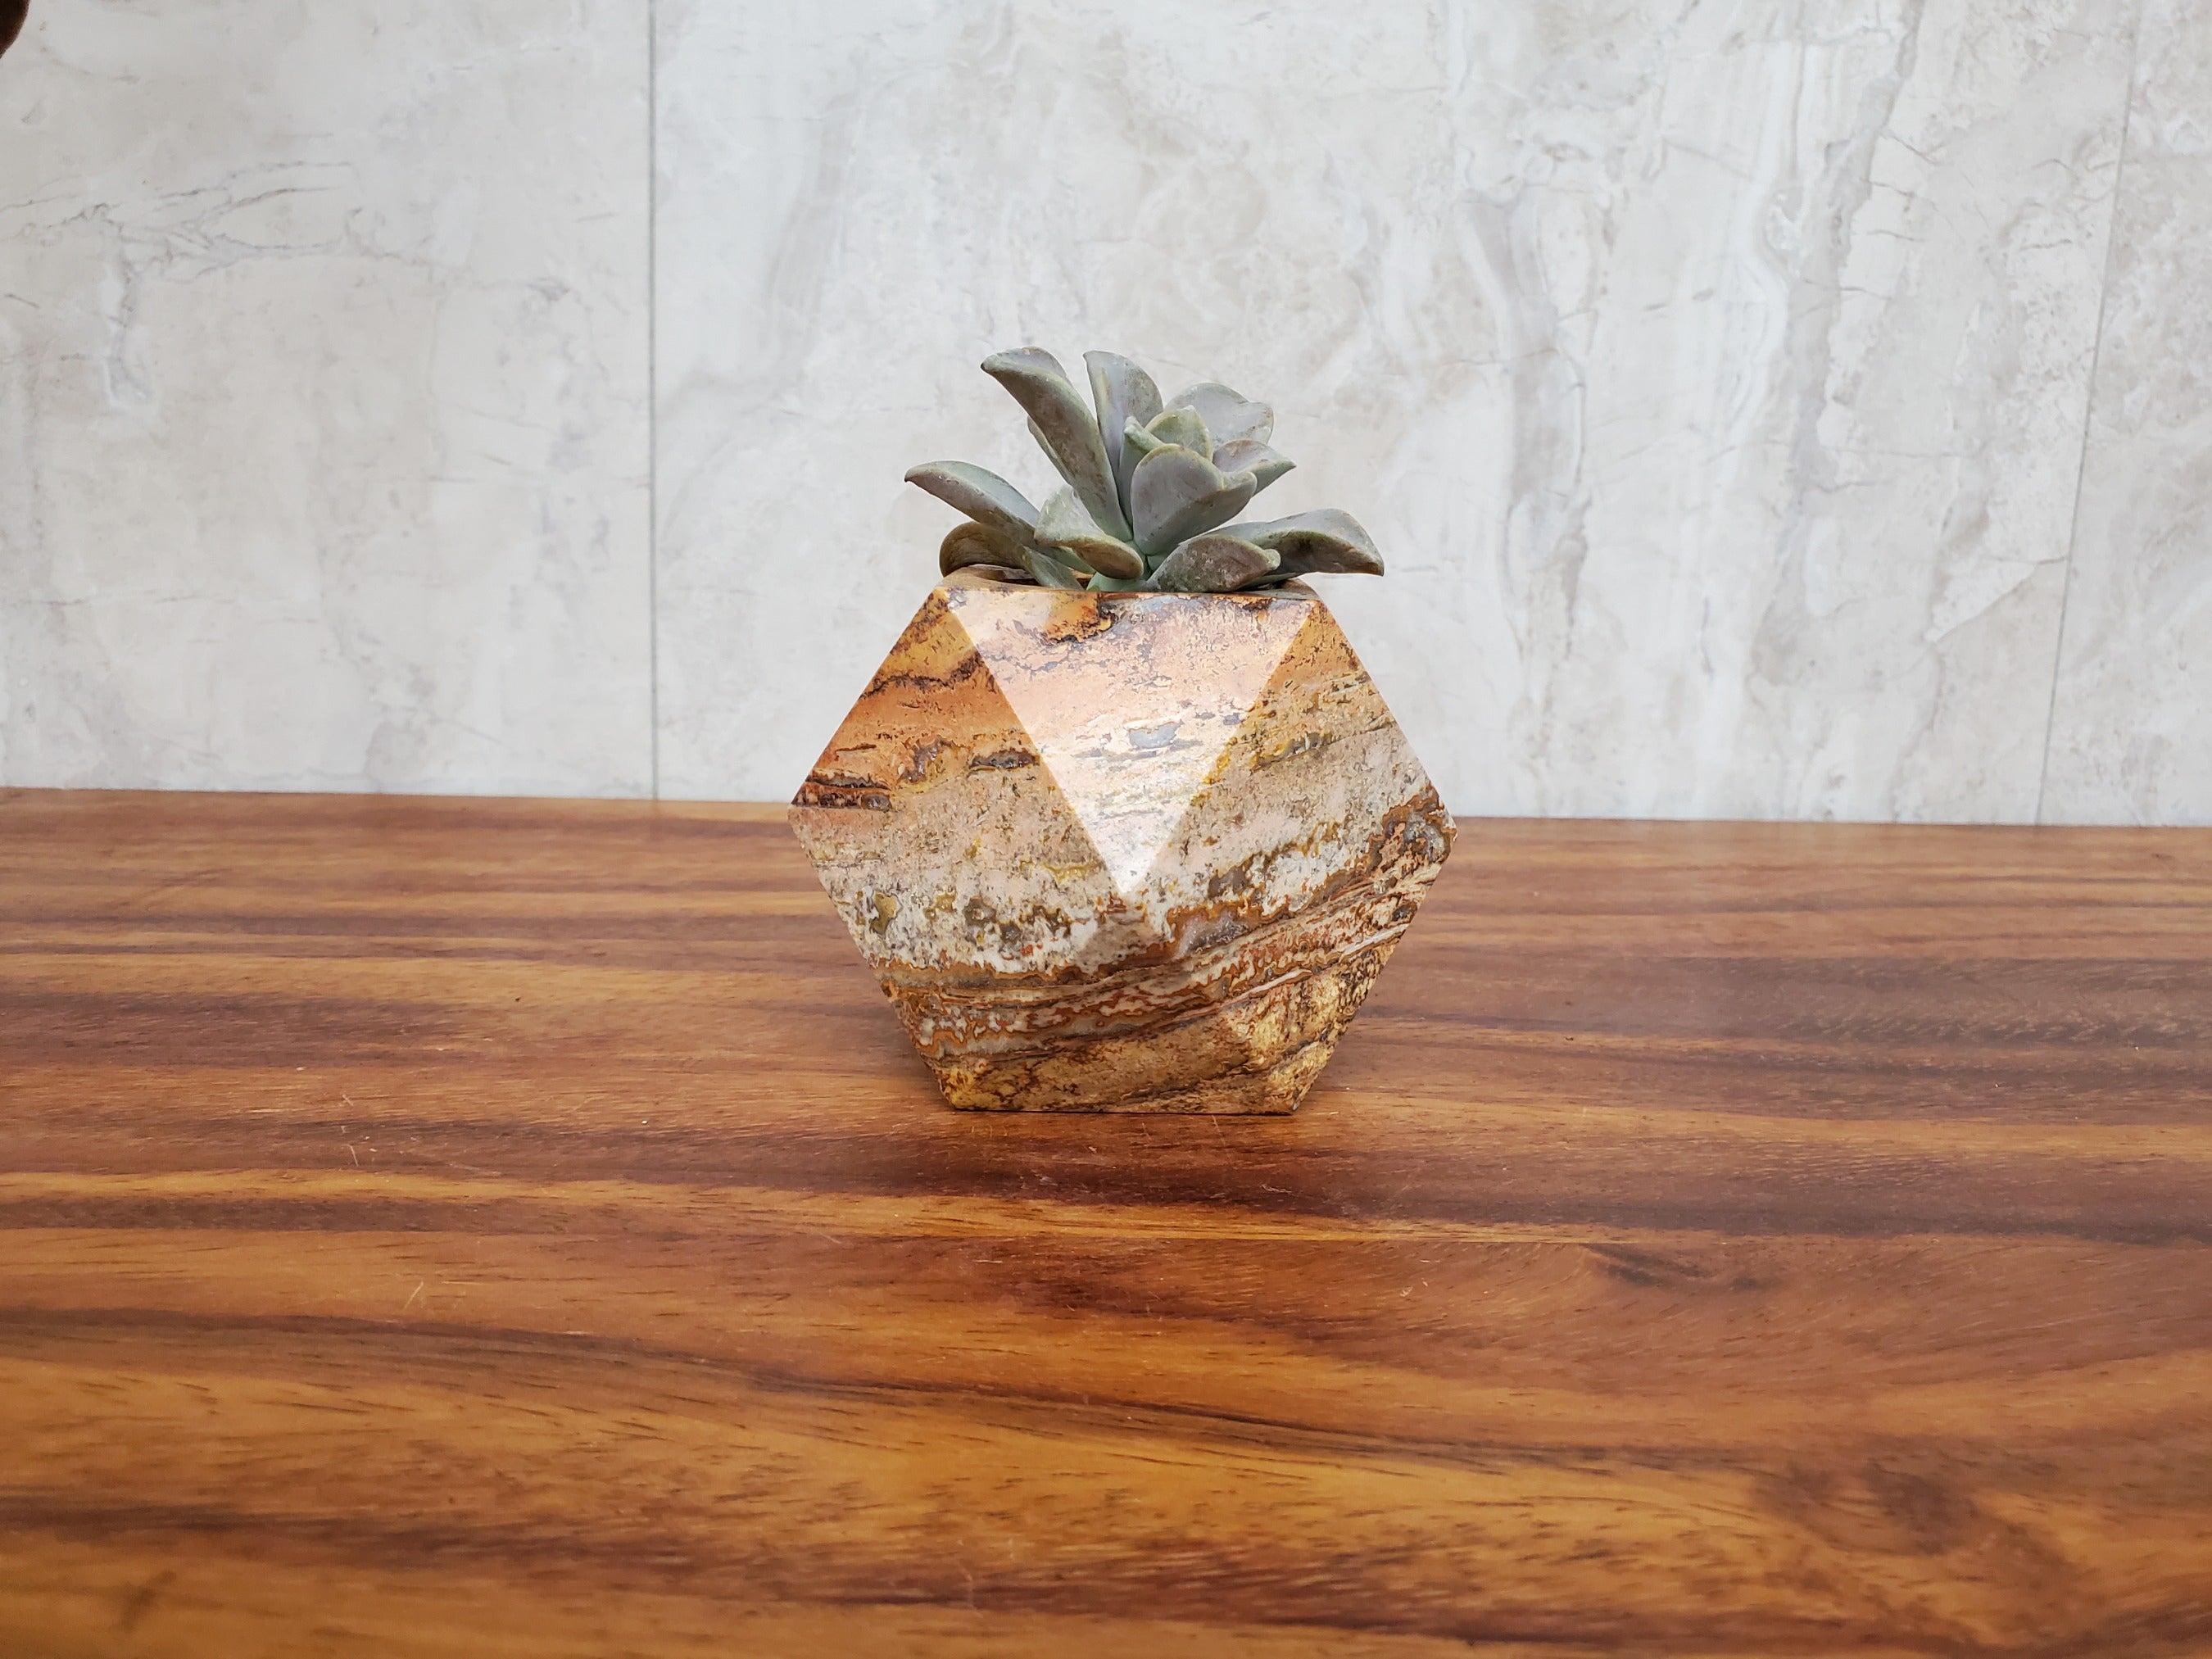 Red Orange Travertine Stone Geometric Mini Planter for Succulents and Terrariums. Handmade in Mexico. We ship and package from the USA. Buy now at www.felipeandgrace.com.